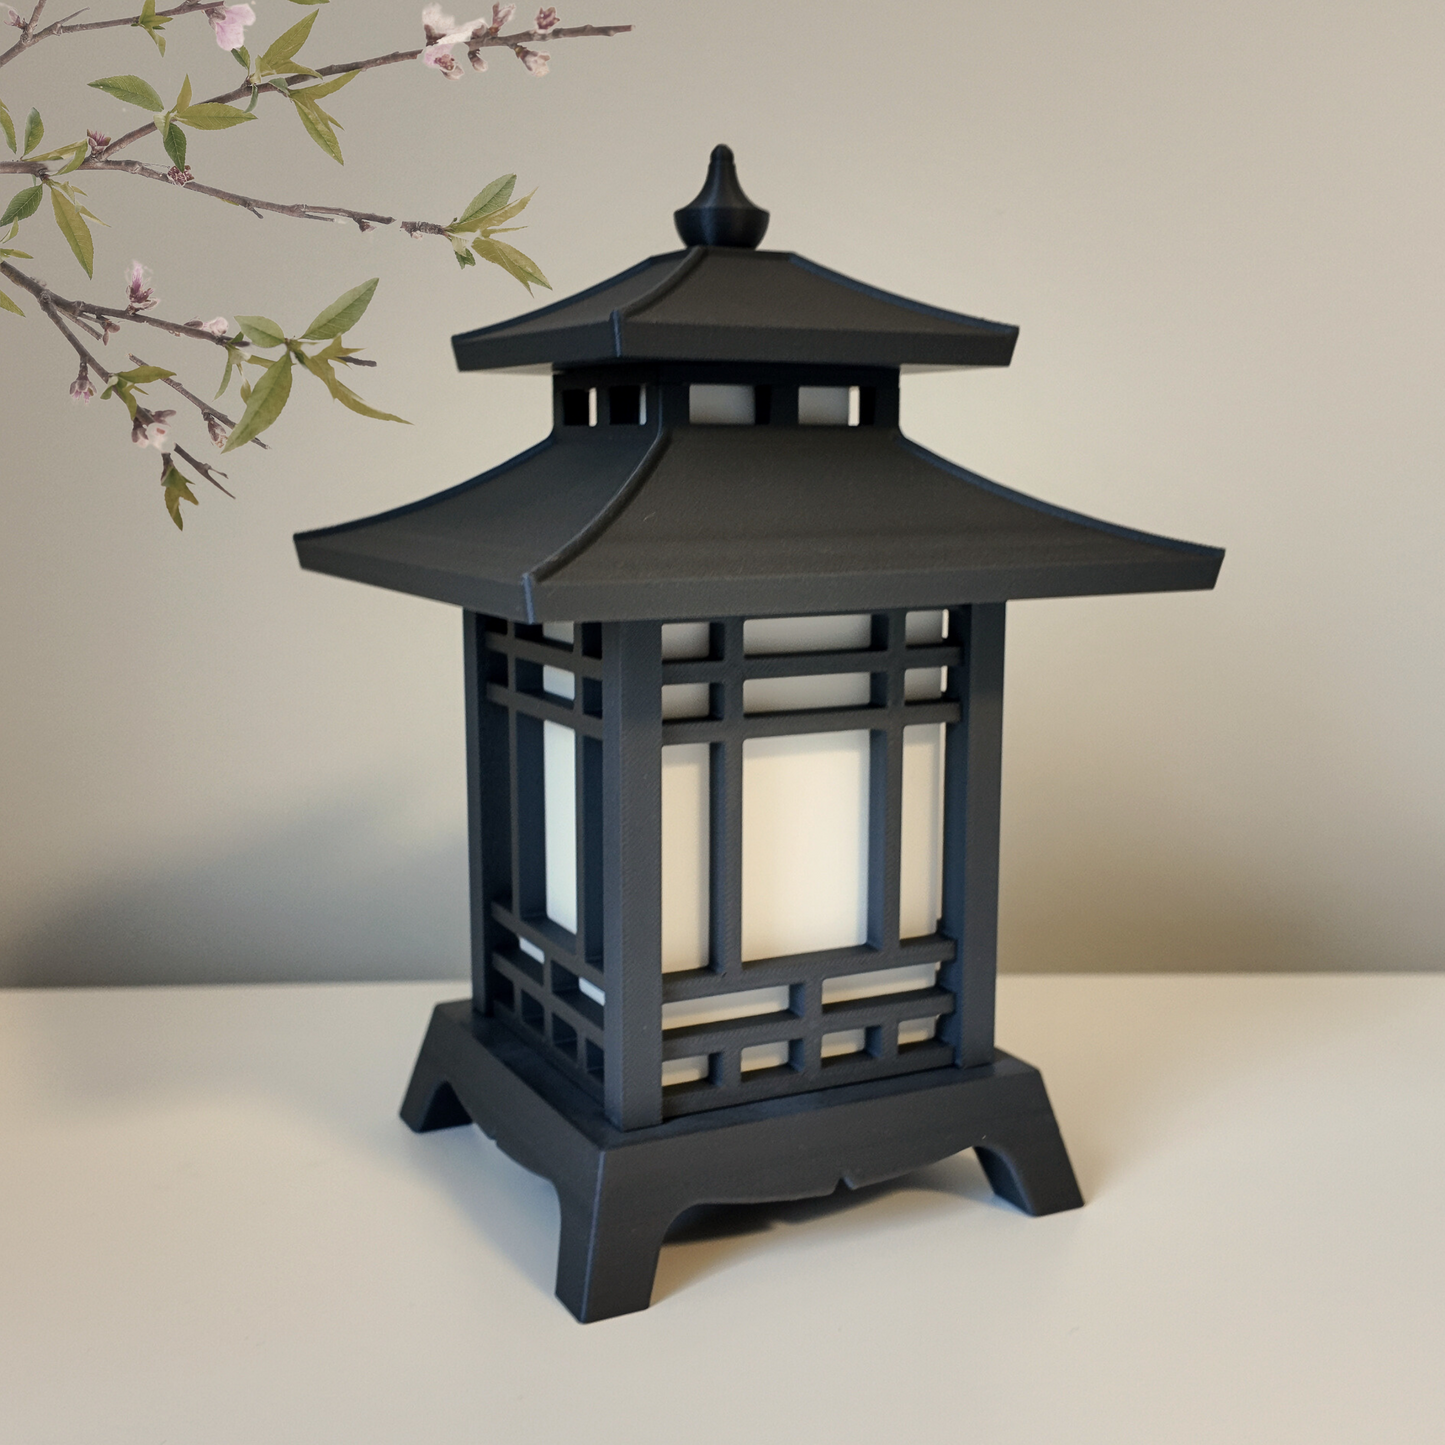 Japanese Pagoda Lantern - Exquisite Japanese Decor for Home and Room | Unique Desk Lamp and Table Lamp Design | Mini Pagoda Transforms Any Space